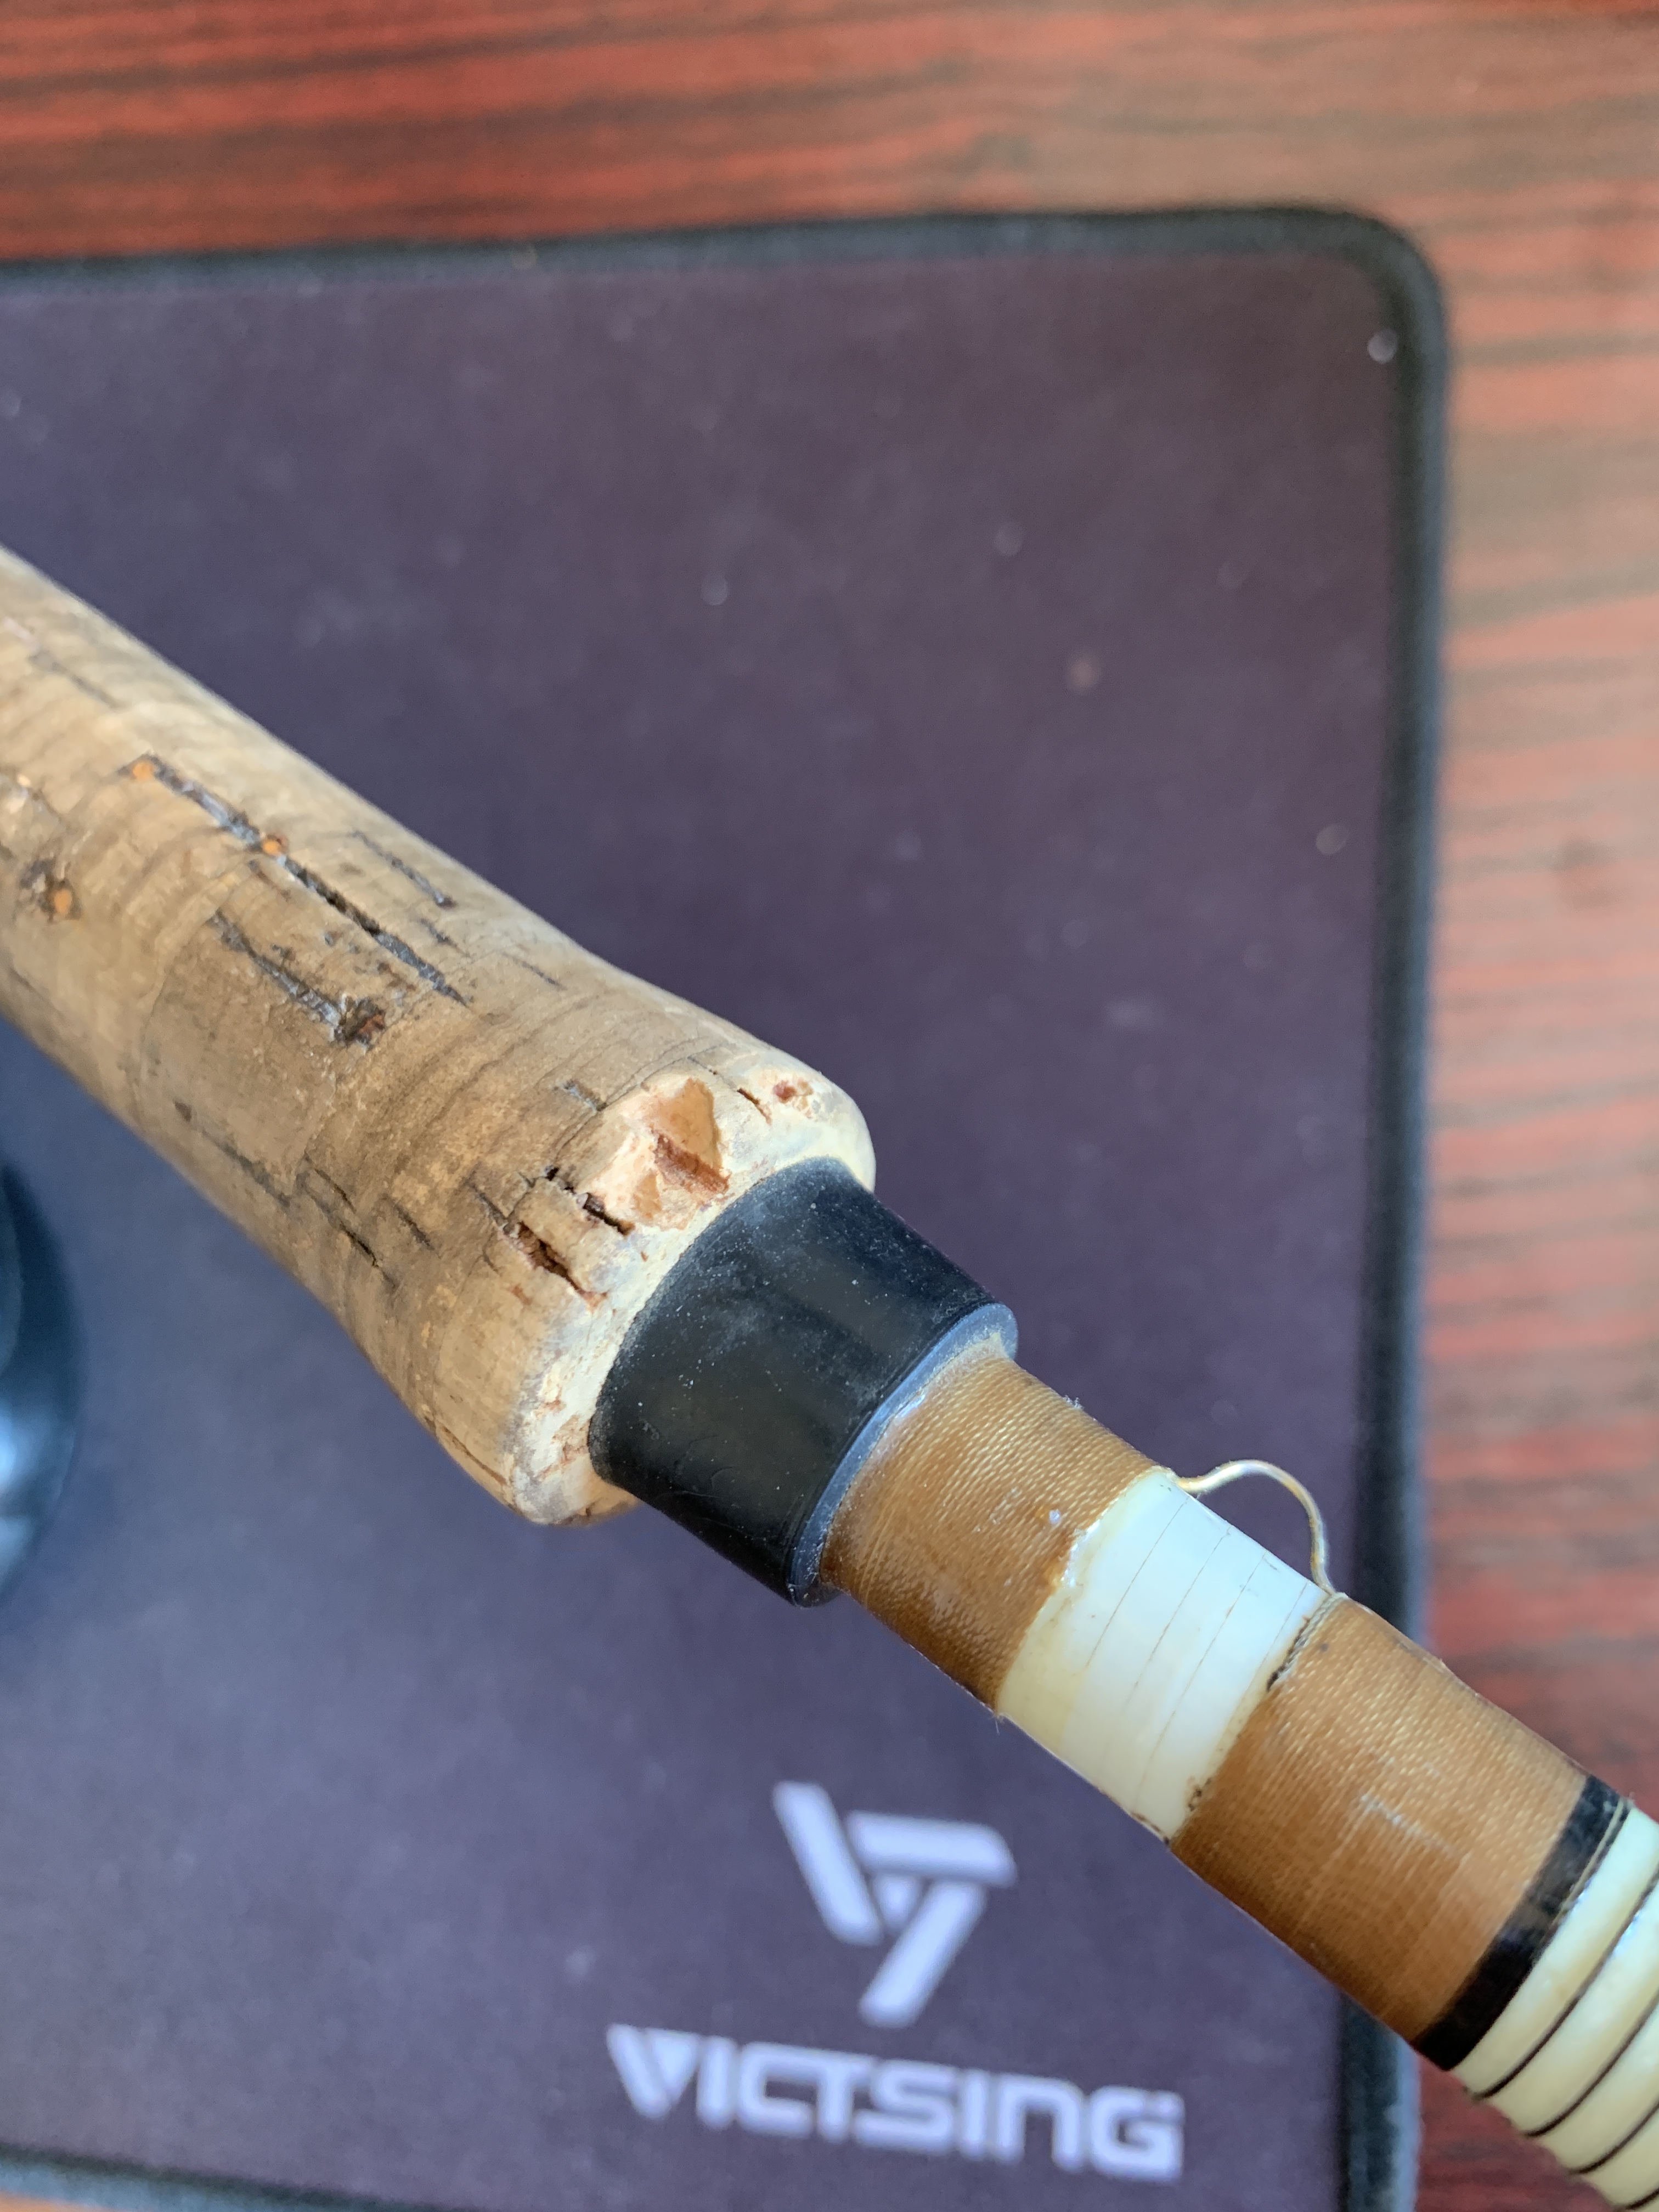 Advice on repairing chip in cork handle